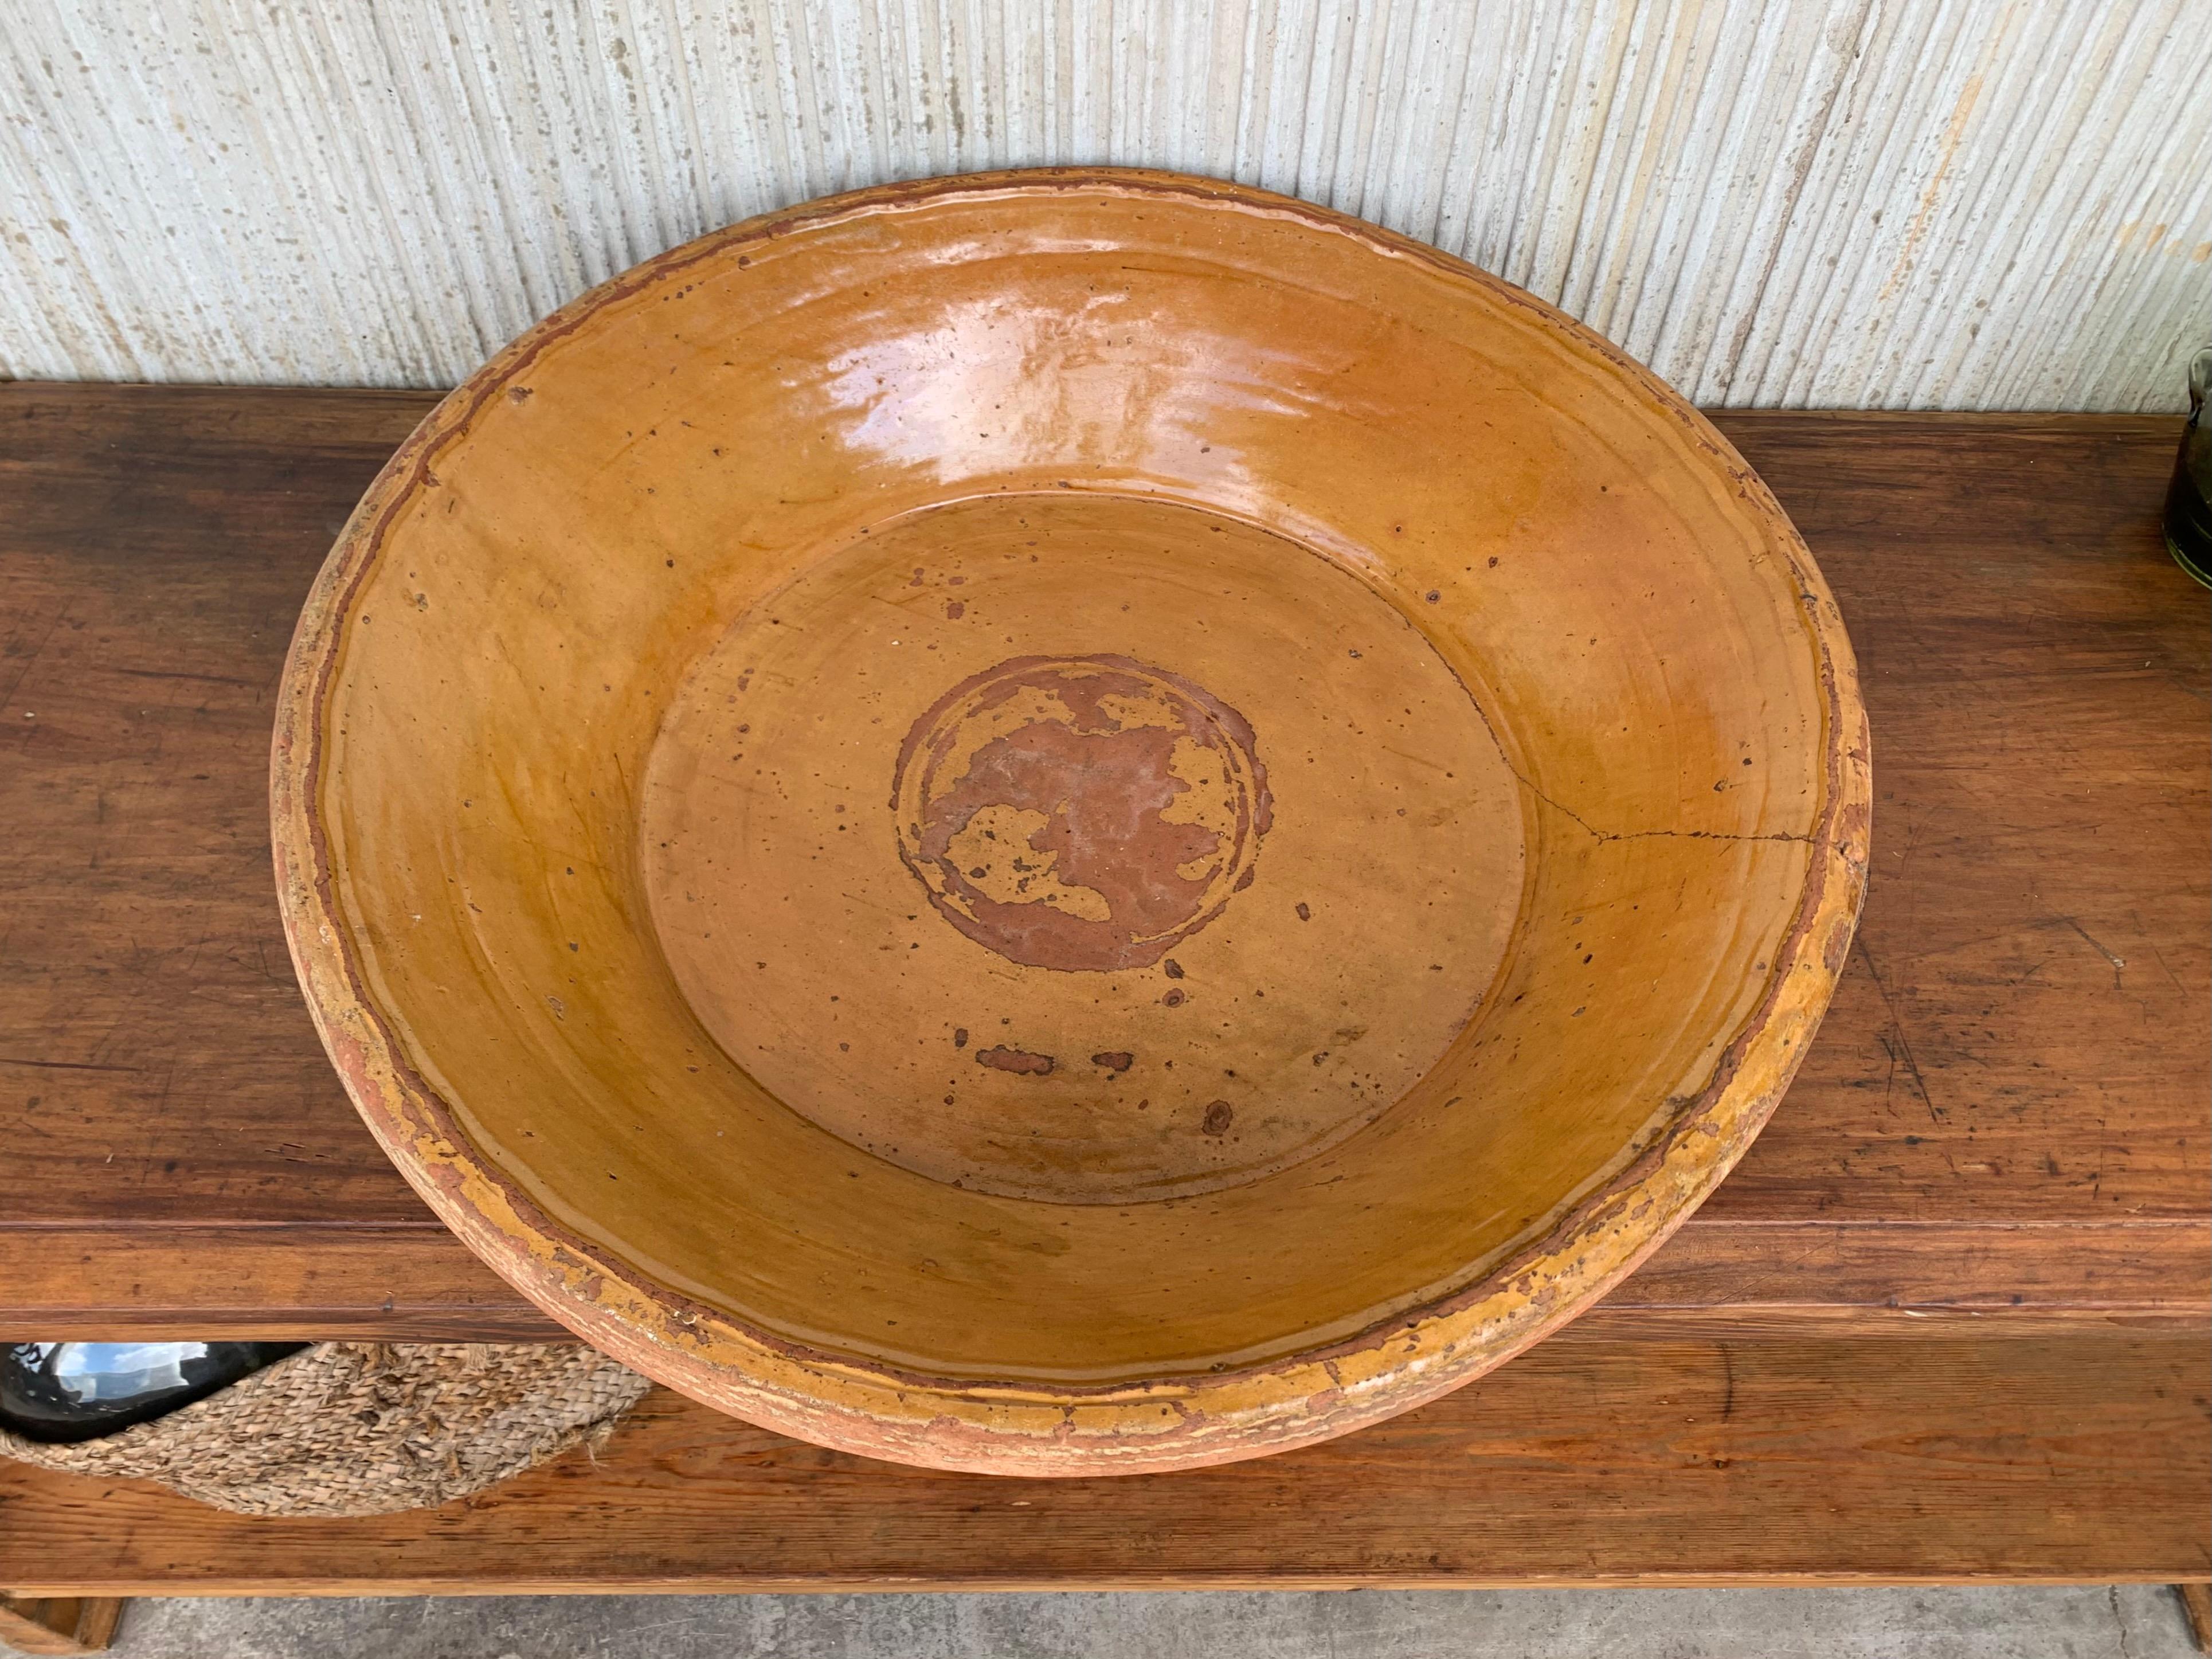 Large one-of-a-kind gorgeous hand thrown and hand glazed cream brown colored stoneware pottery bowl vessel. Thick and glazing like.

This would make an excellent indoor or outdoor water feature. Also appropriate for indoor or outdoor use for